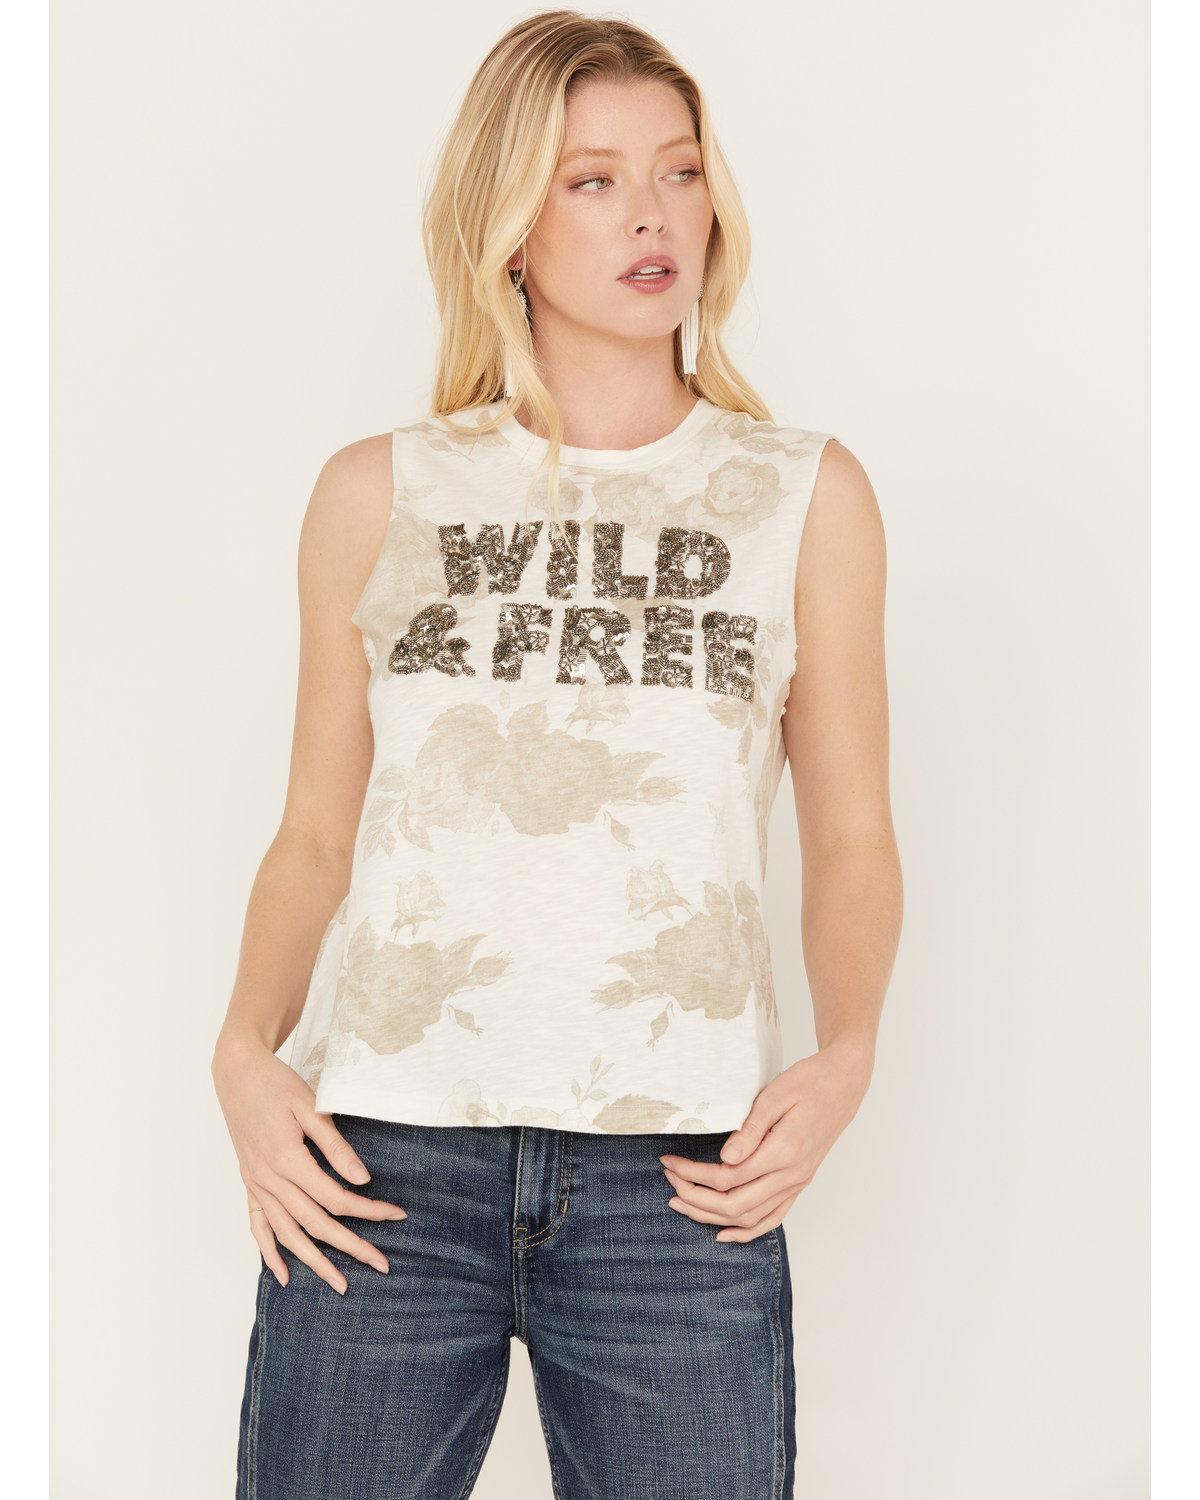 Idyllwind Women's Abby Wild and Free Embellished Graphic Tank